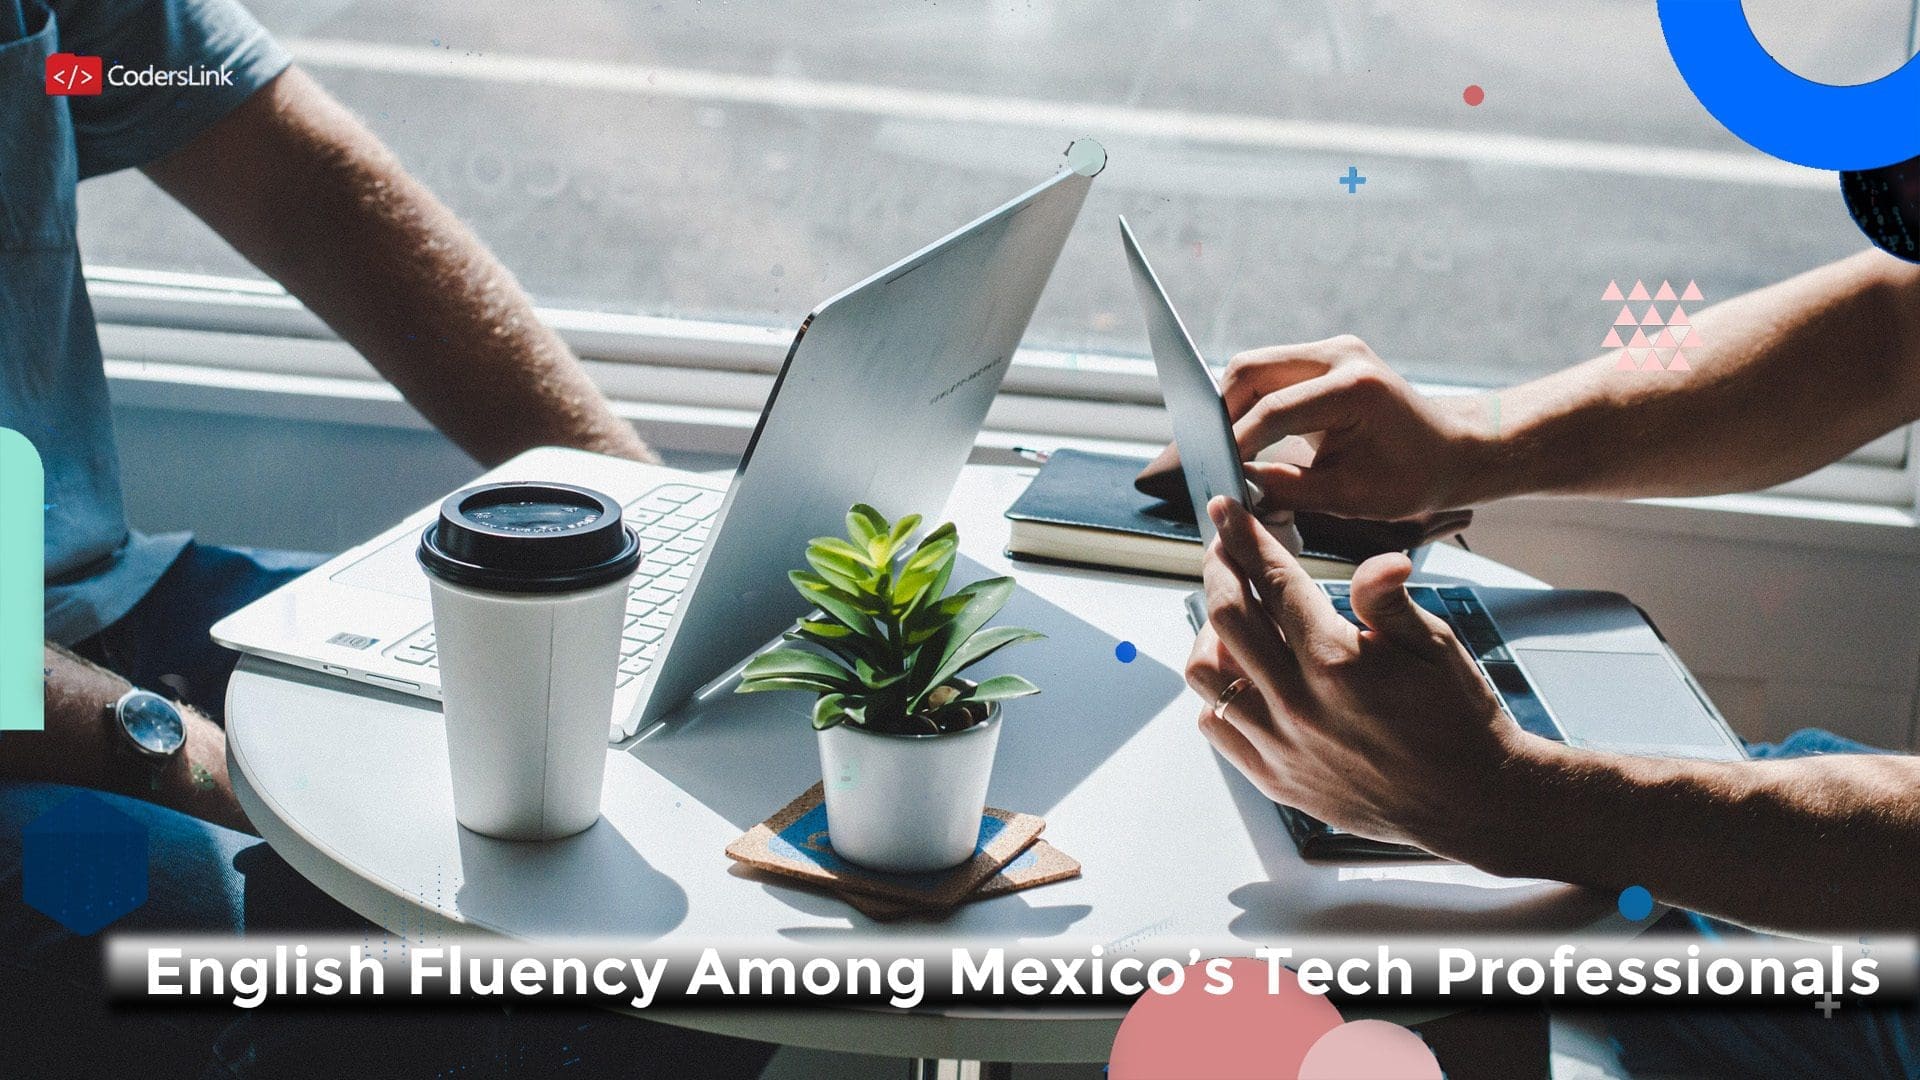 English Fluency in Mexico's Tech Professionals